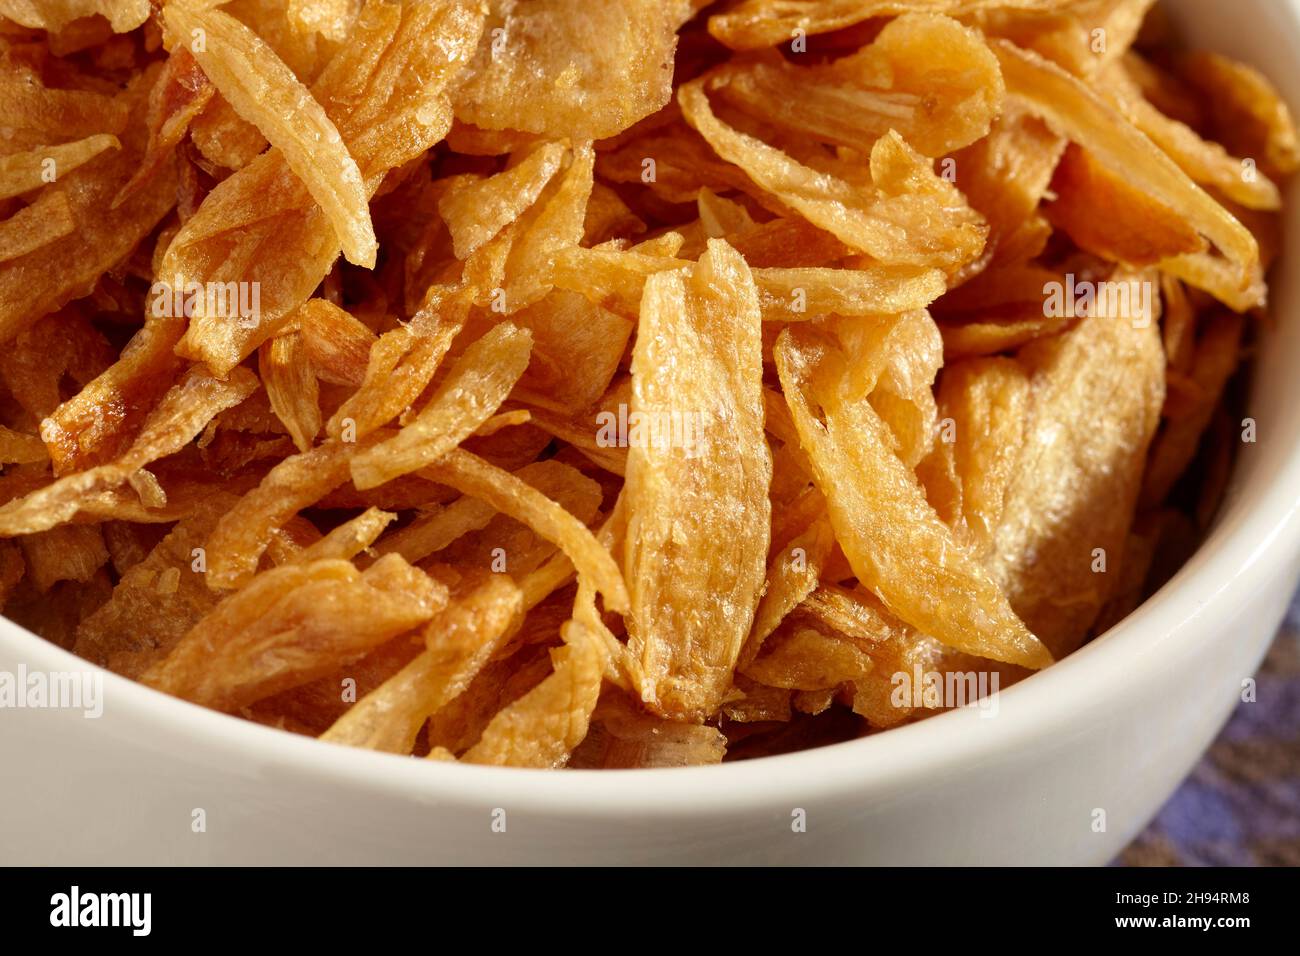 Chips of fried red onion Stock Photo